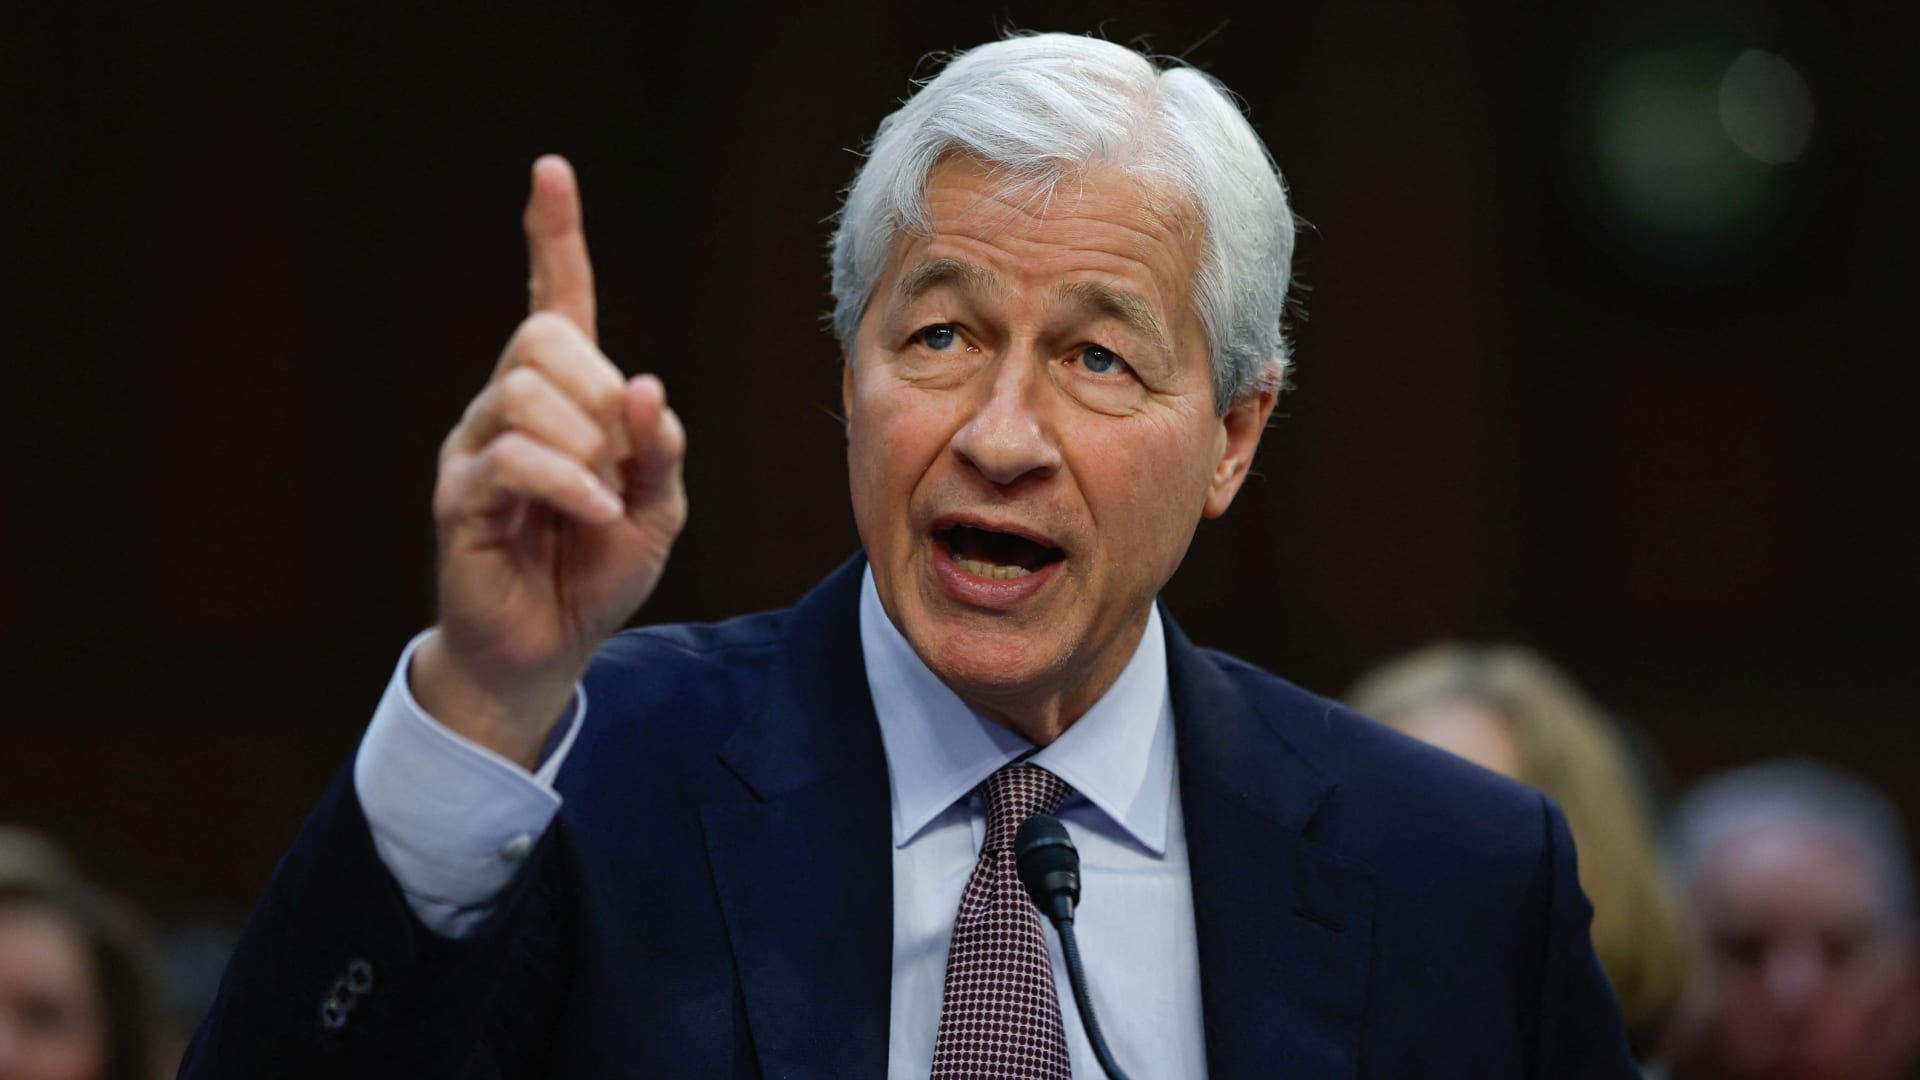 JPMorgan CEO Jamie Dimon urges U.S. to deal with its fiscal deficit